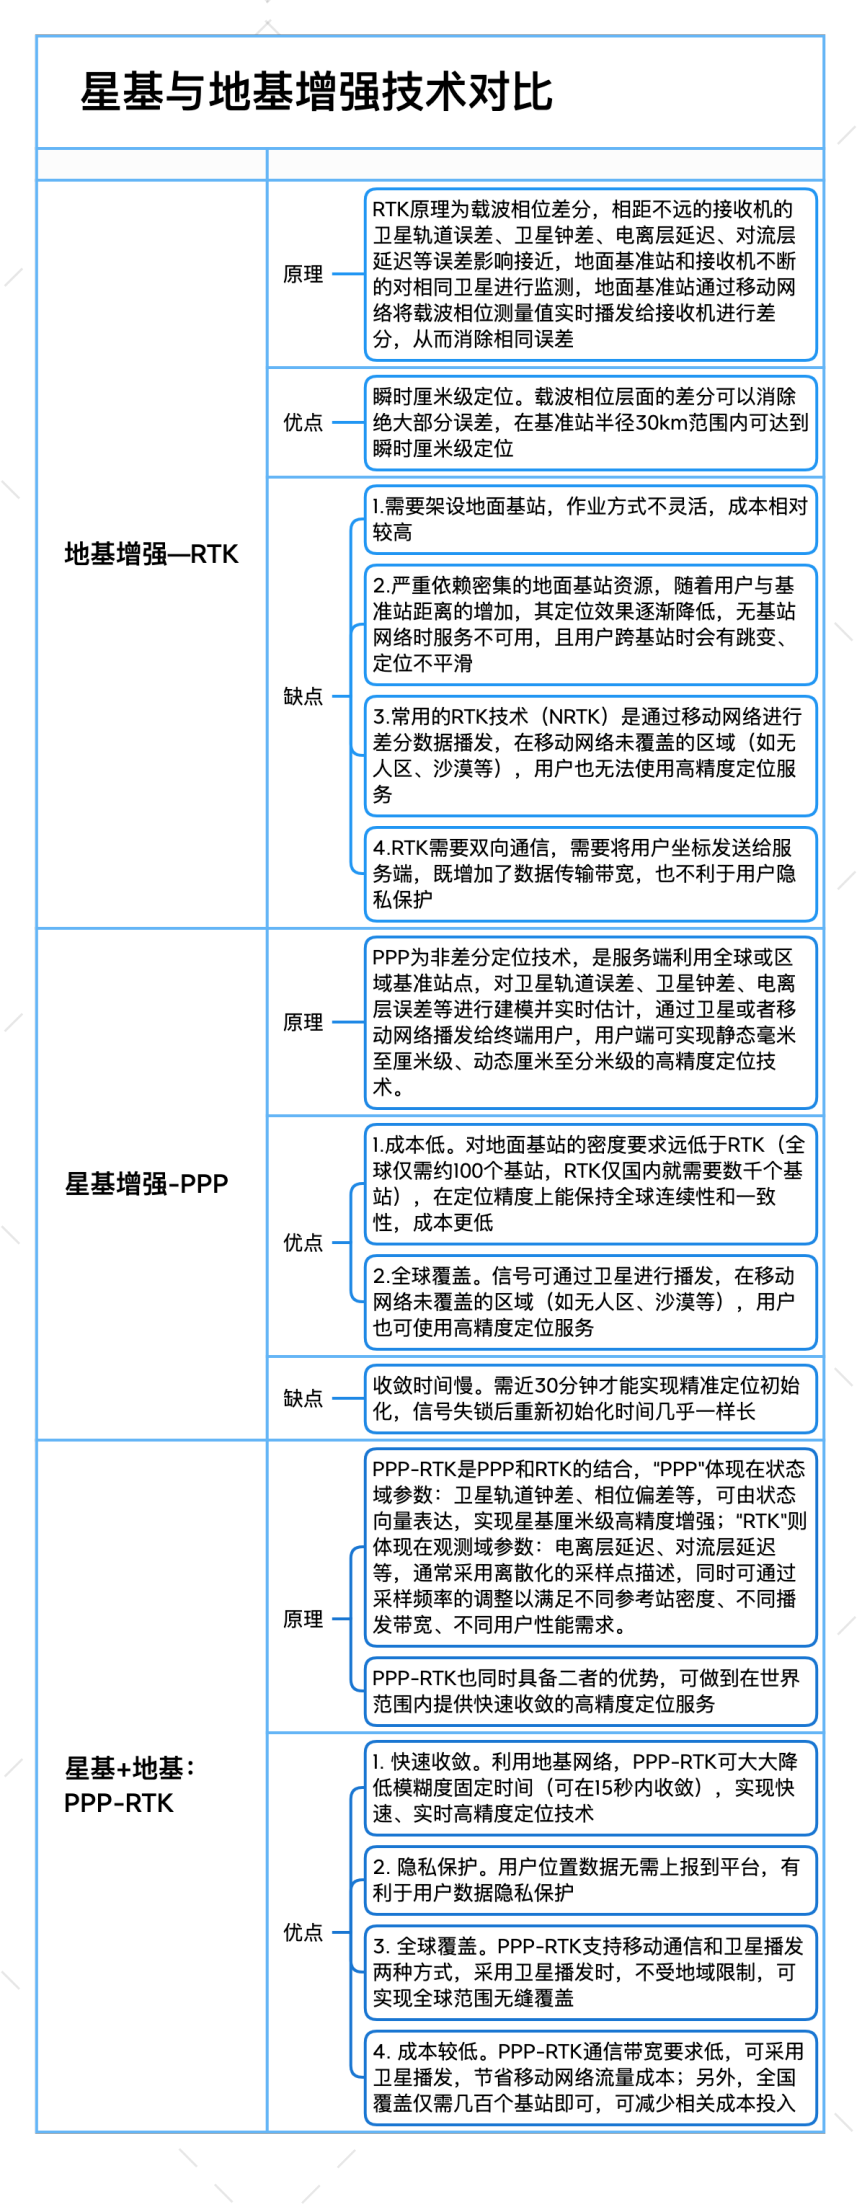 Comparison of RTK/PPP/PPP-RTK
Information source: Jiuzhang Intelligent Driving based on public information and expert interviews